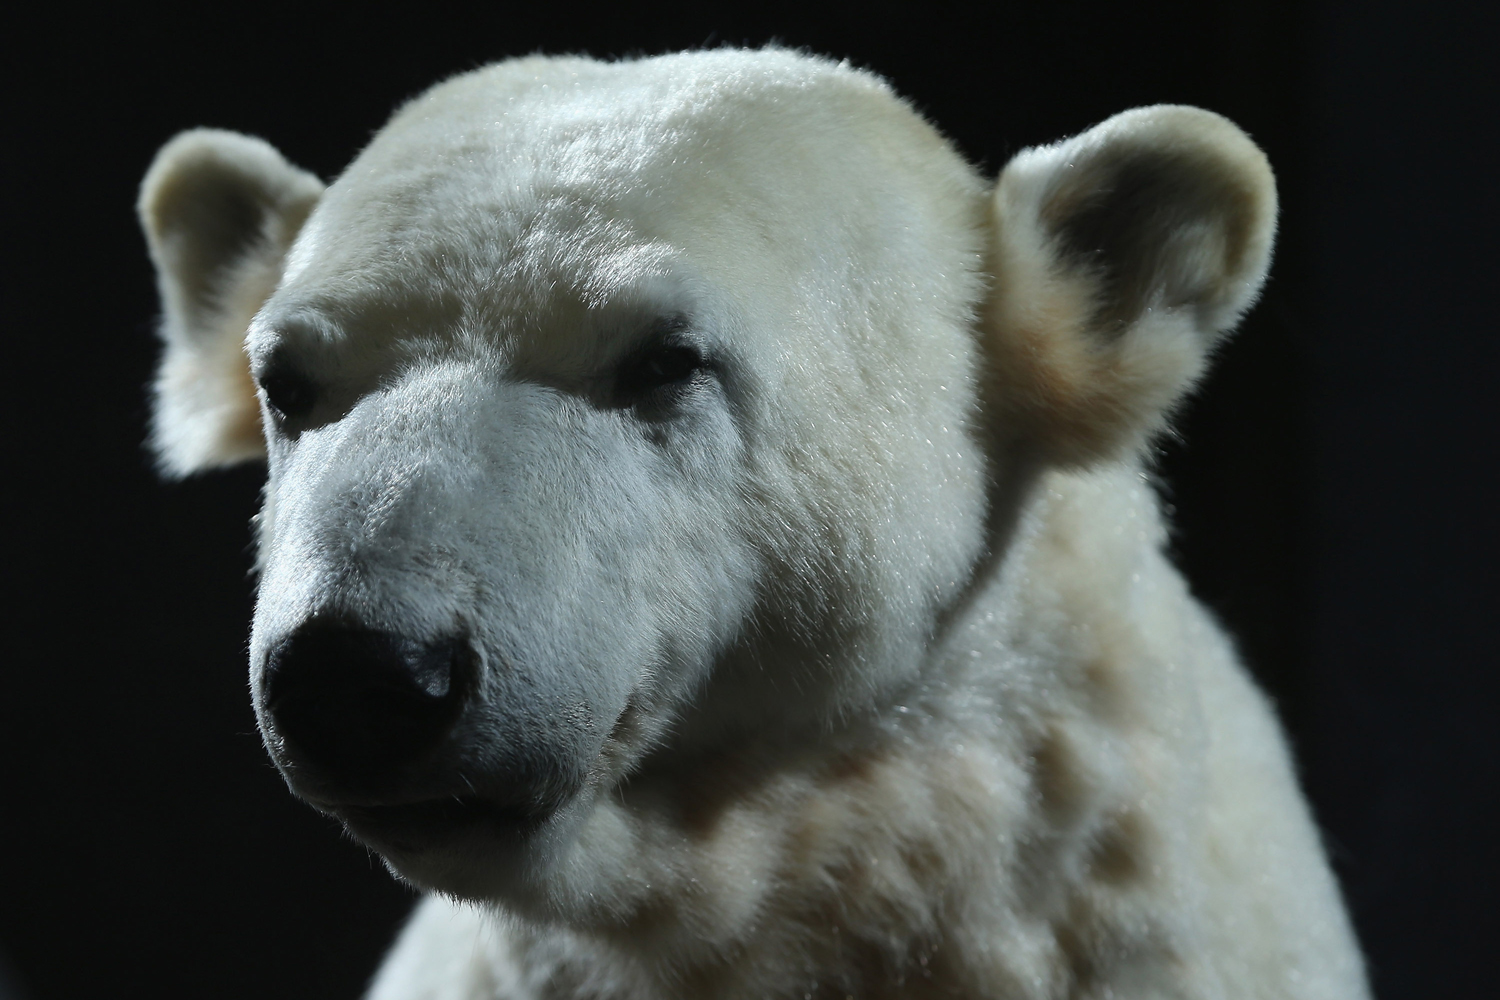 Model Of Knut The Polar Bear Goes On Display At Natural History Museum In Berlin